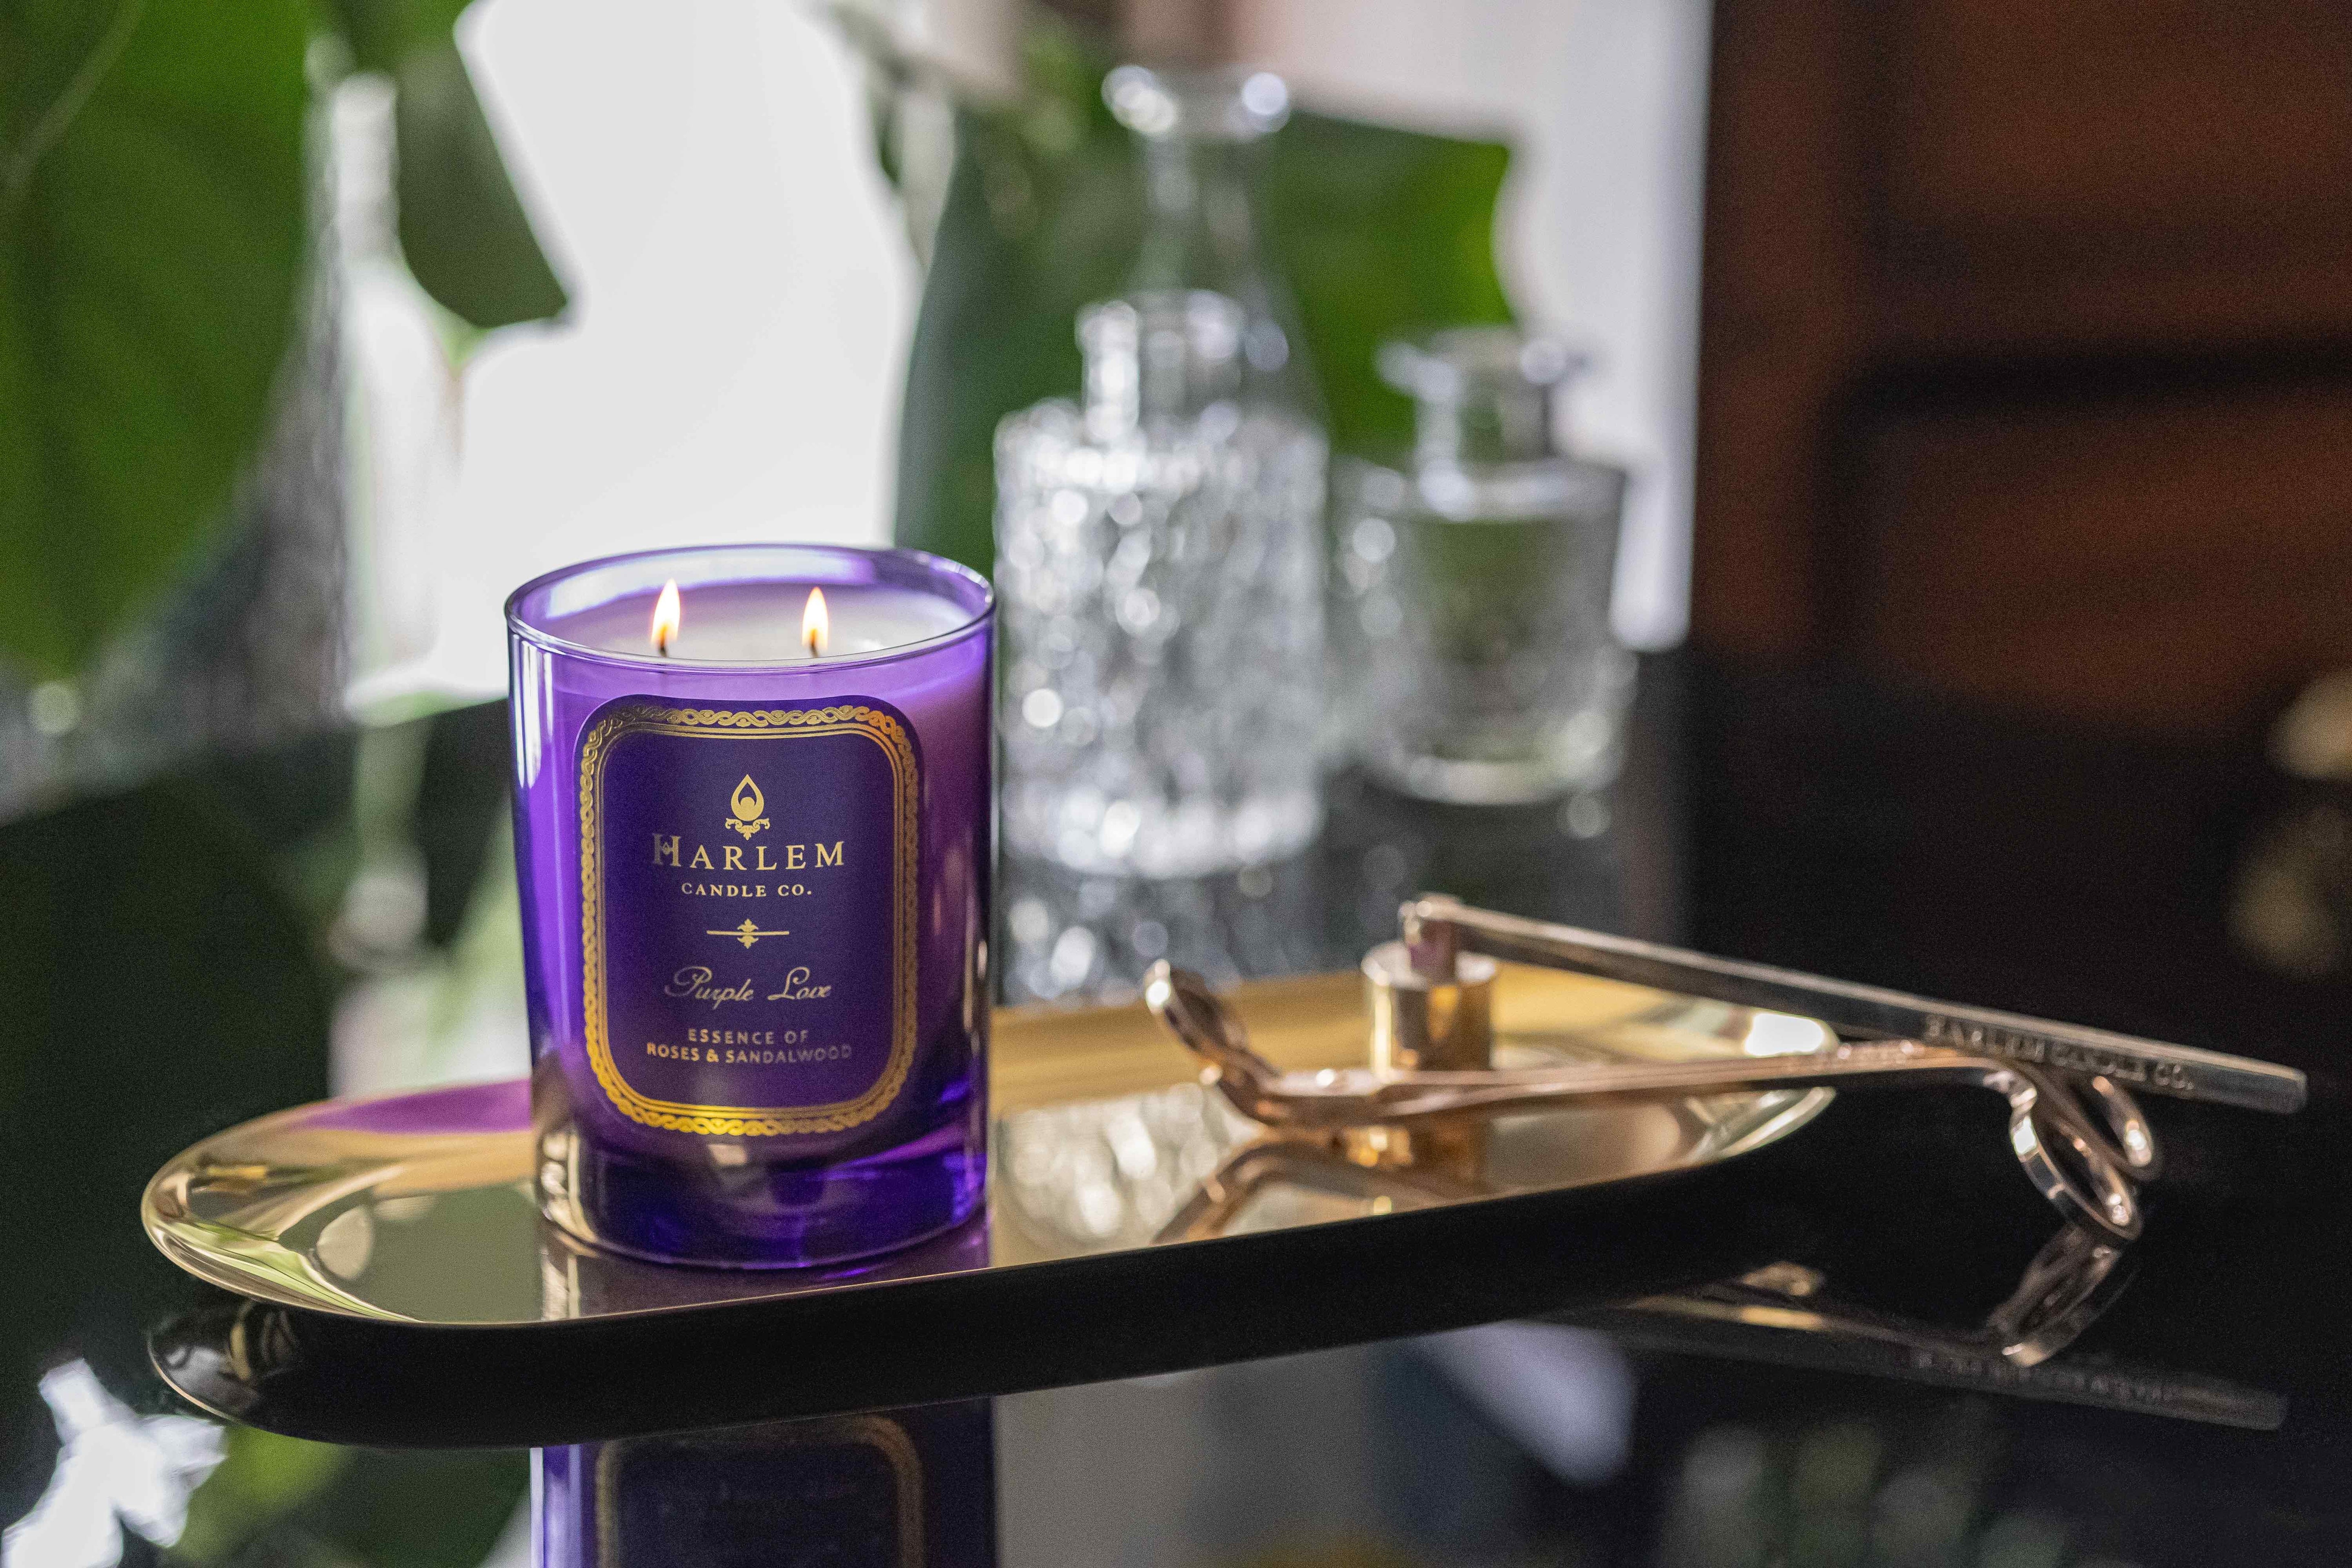 Lifestyle image of the purple love candle that is lit up. On a black table next to the Harlem Candle wick trimmer and snuffer with clear glass bottles in the background.